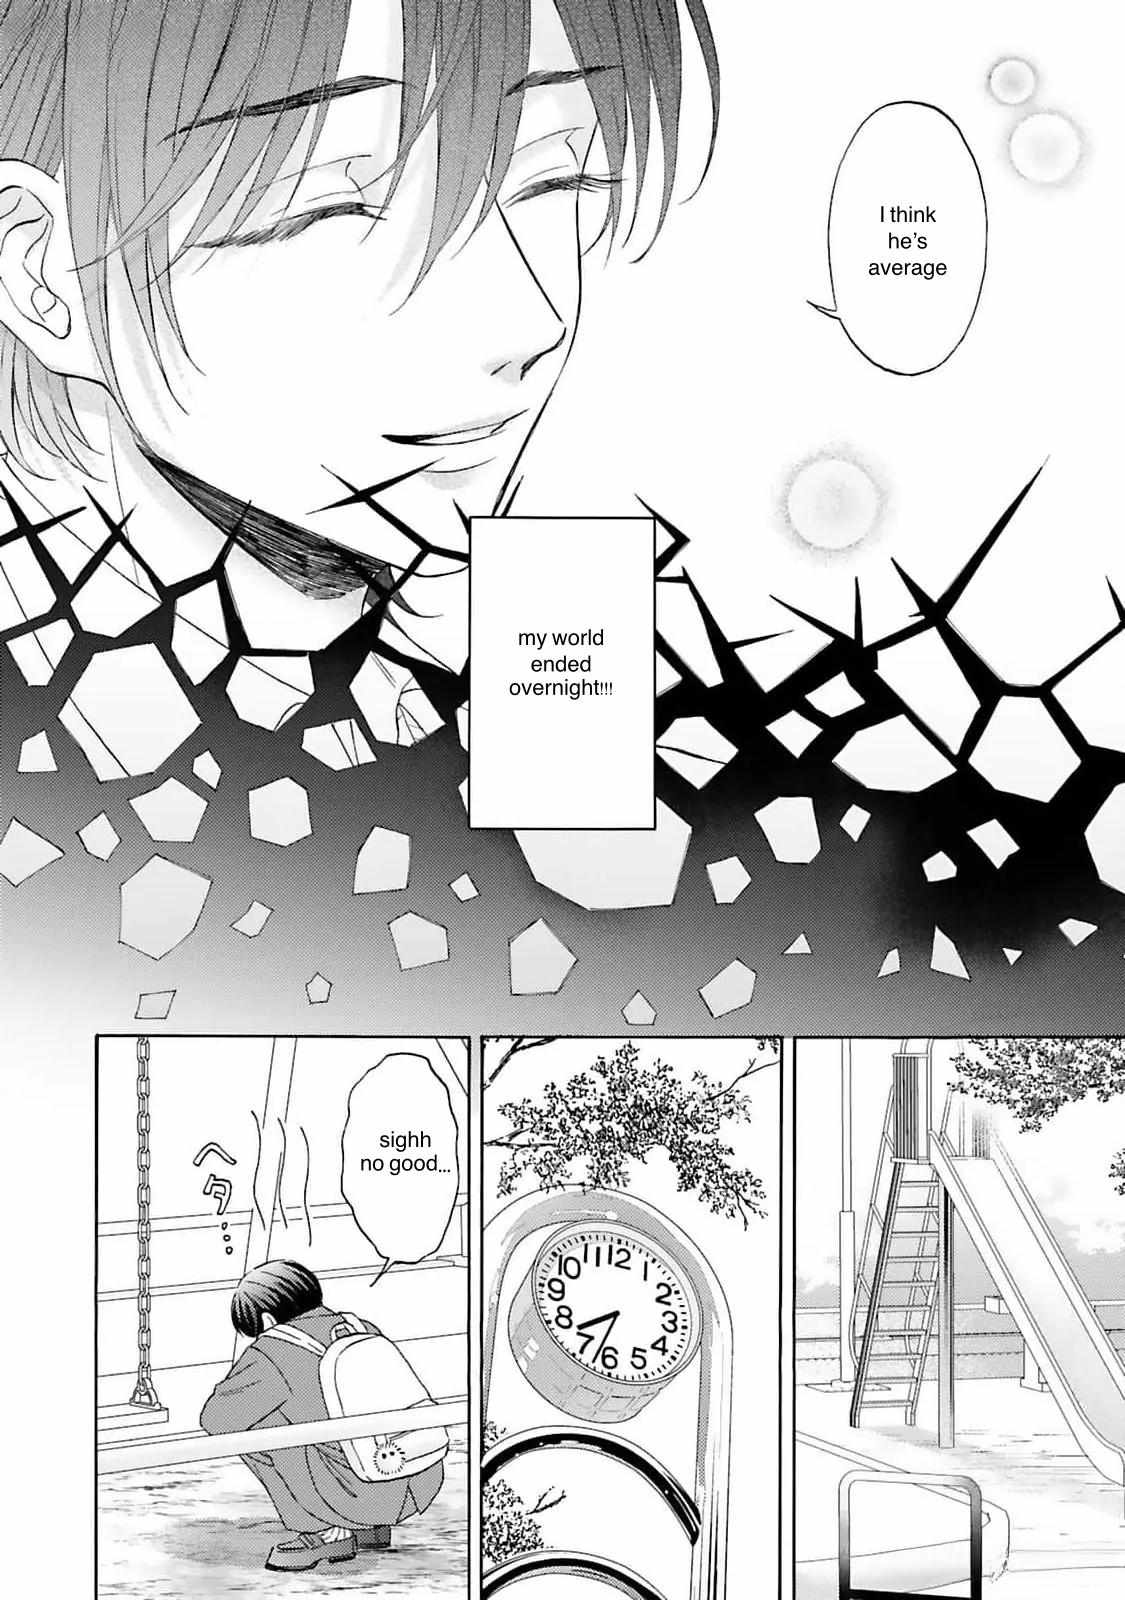 My Cutie Pie -An Ordinary Boy And His Gorgeous Childhood Friend- 〘Official〙 - 4 page 4-dddaca17